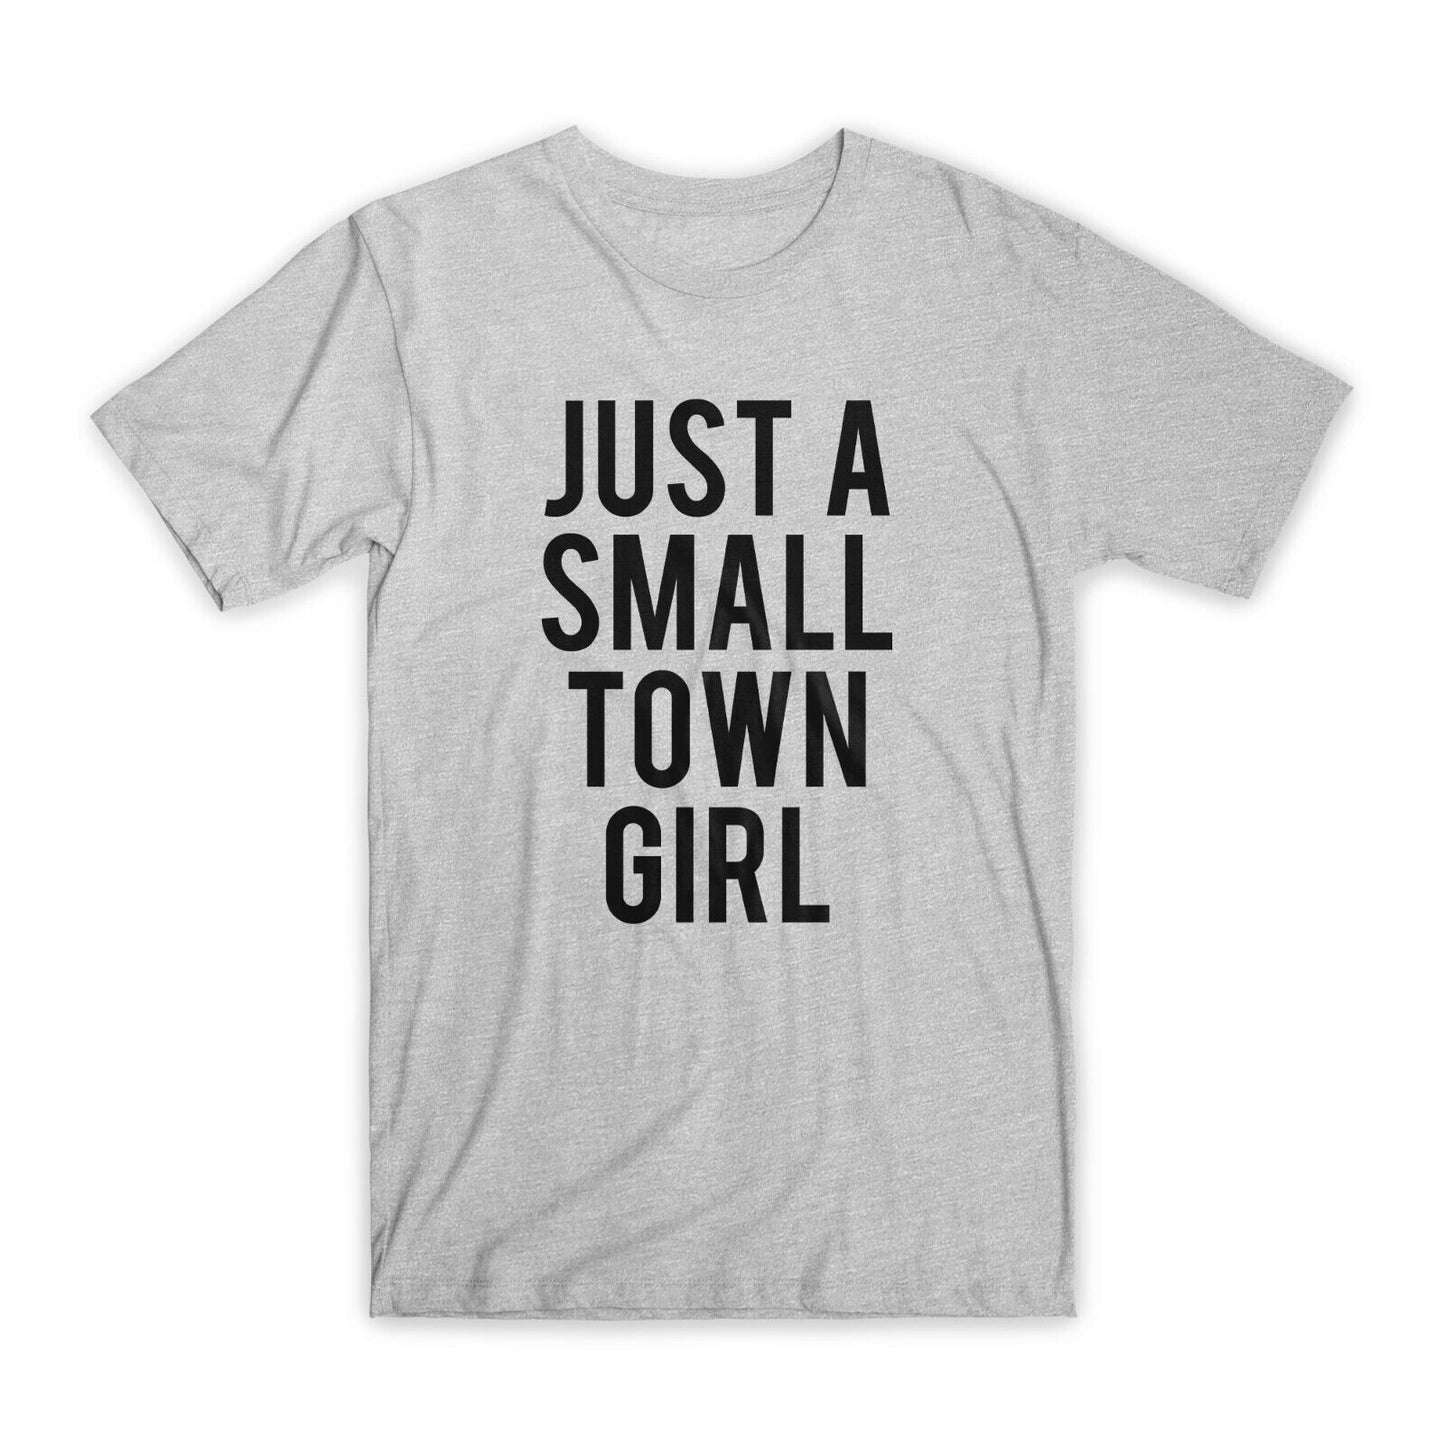 Just A Small Town Girl T-Shirt Premium Soft Cotton Crew Neck Funny Tee Gifts NEW